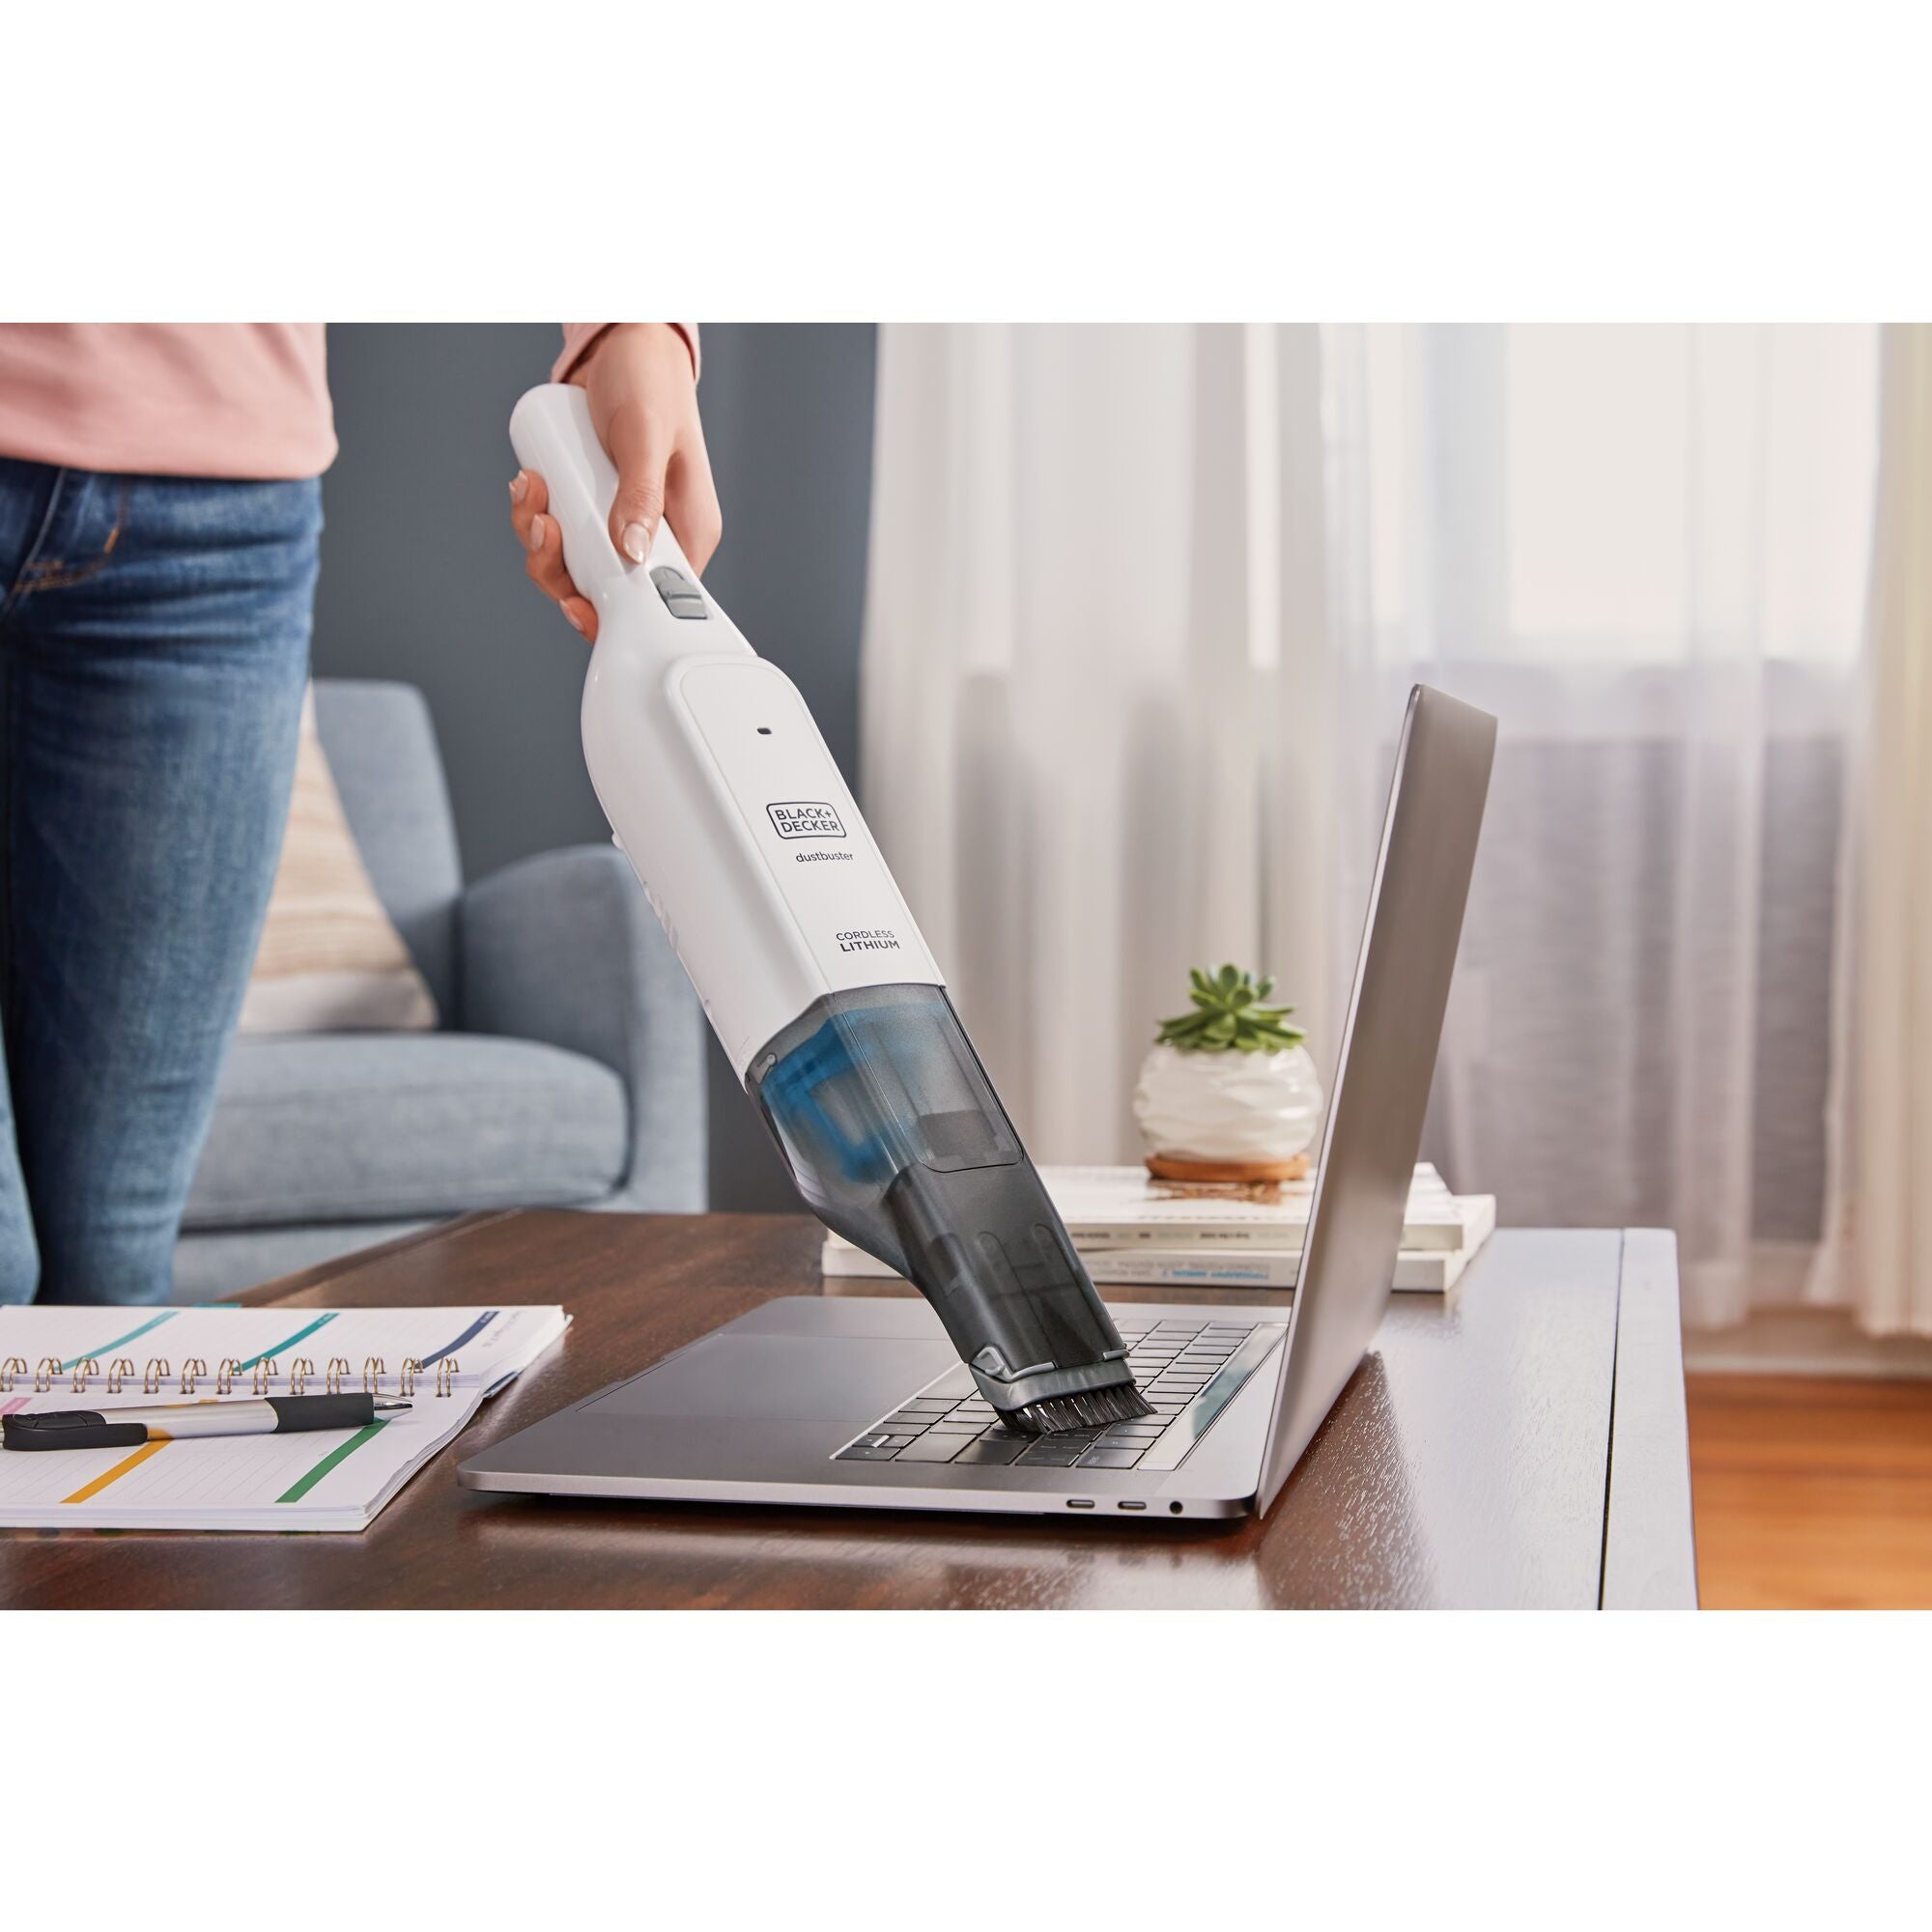 Dustbuster AdvancedClean+ 12V 7 cup Handheld Vacuum MISSING CHARGER – Spend  Less Store